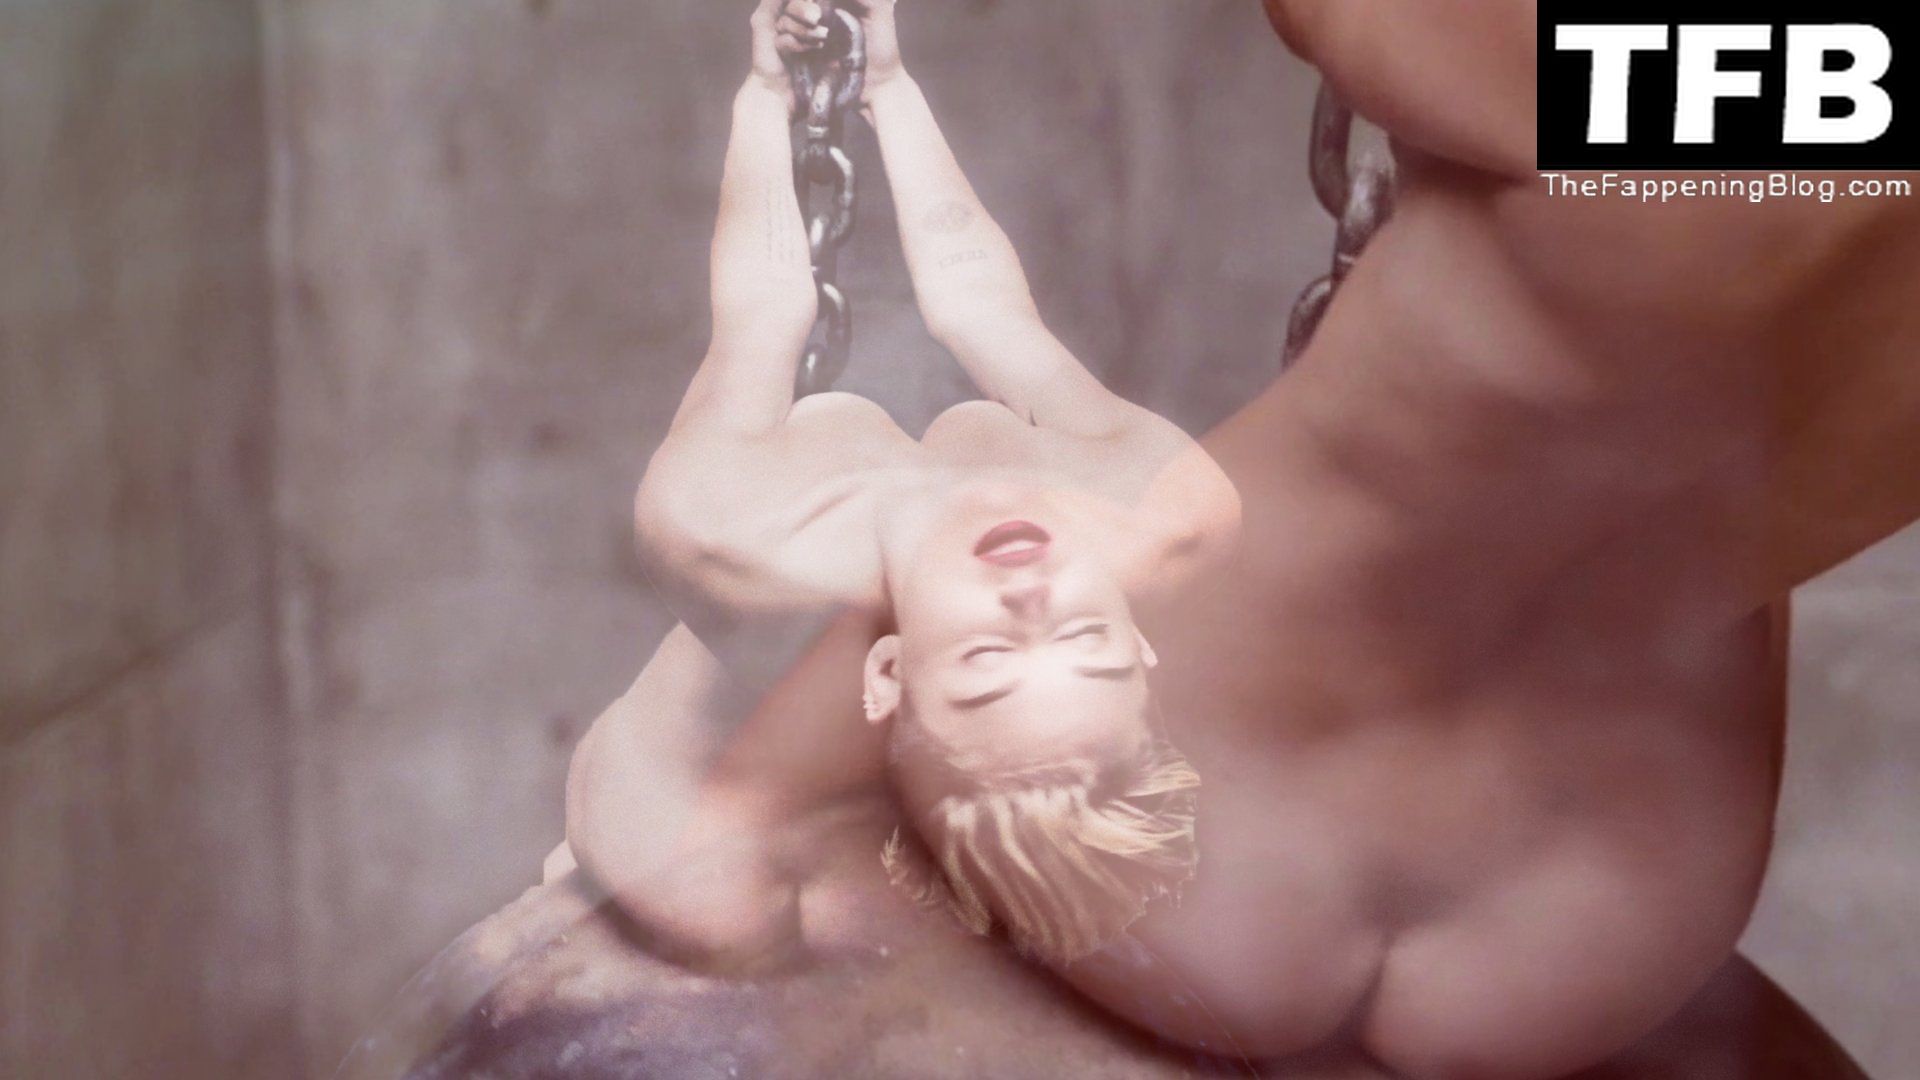 Miley-Cyrus-Nude-Wrecking-Ball-The-Fappening-Blog-15.jpg